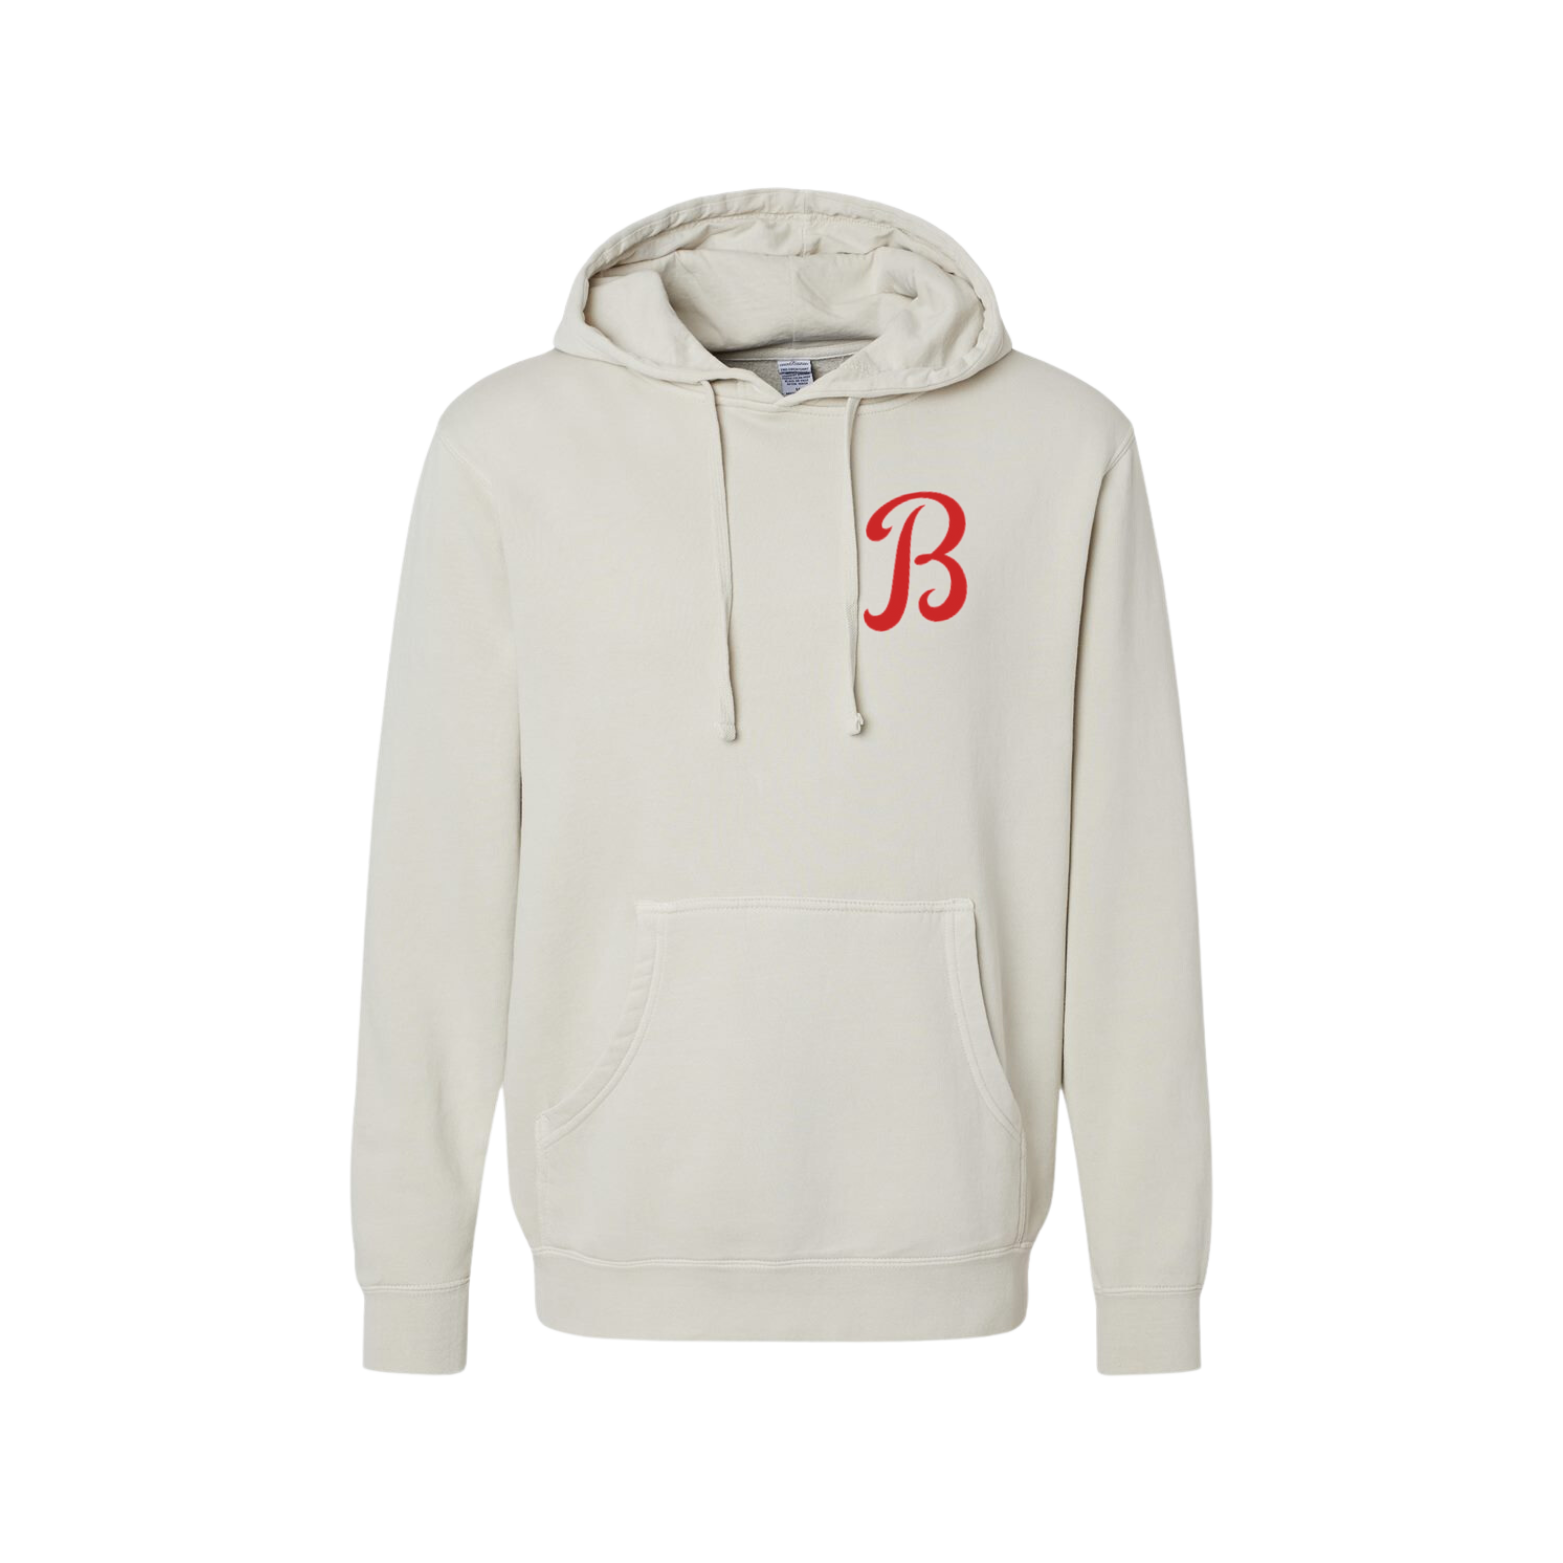 Brotherly Swag - Classic "B" Hoodie